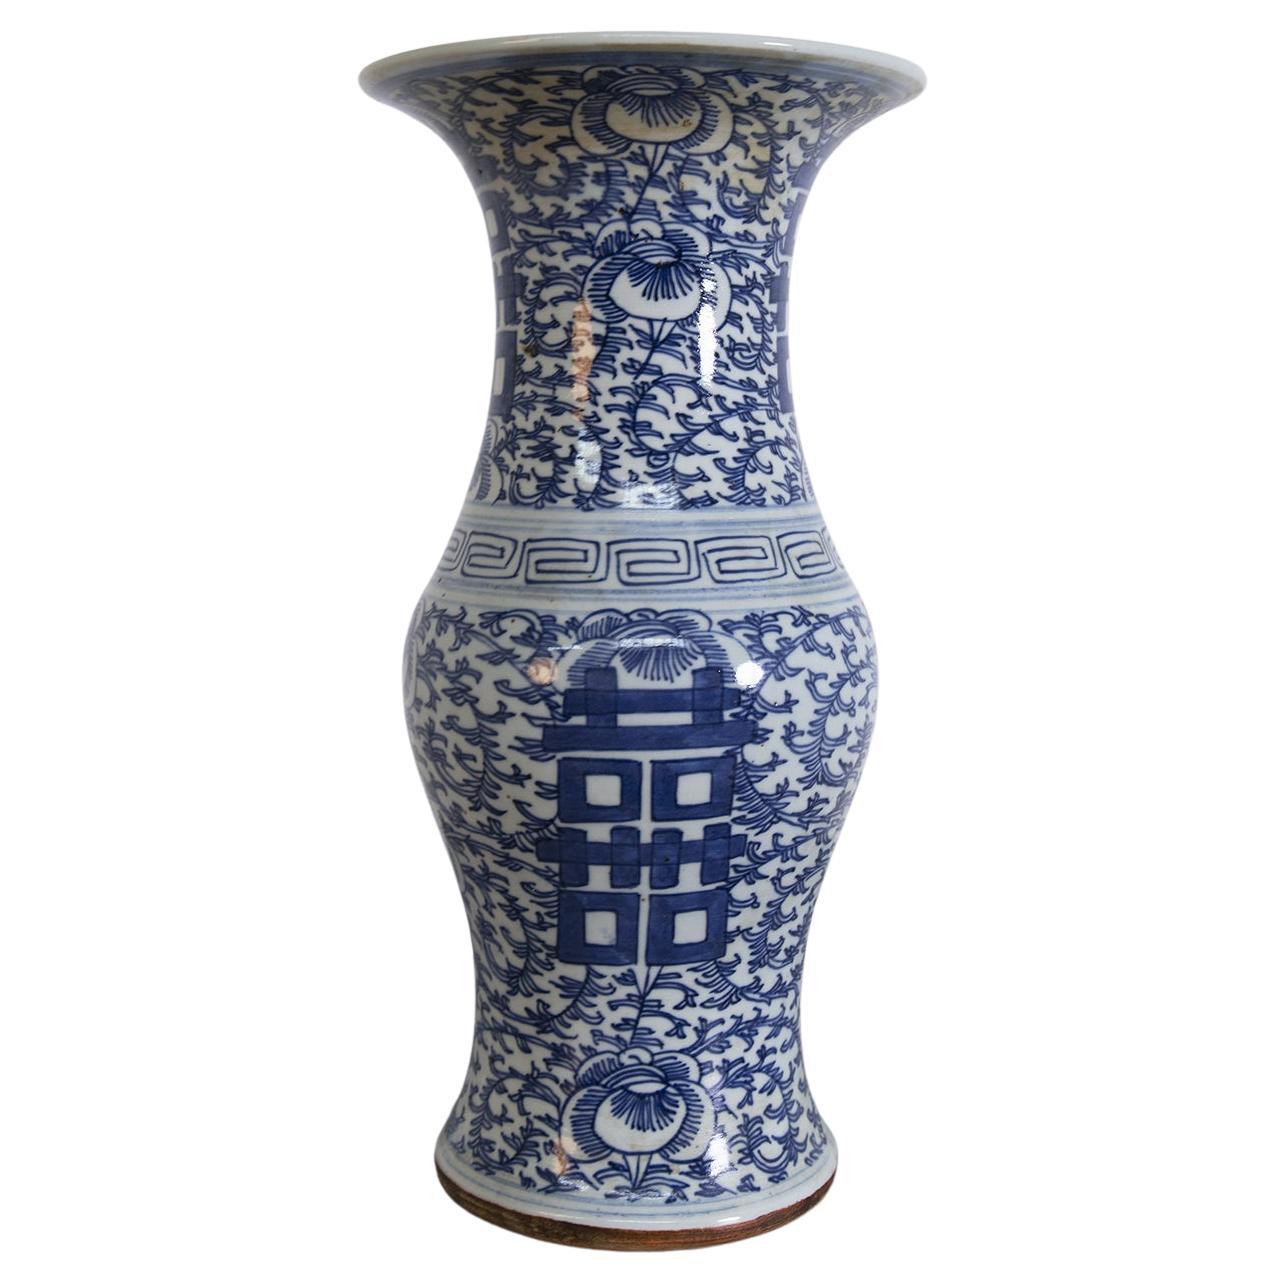 Qing Dinasty Happiness Ceramic Antique Chinese Vase